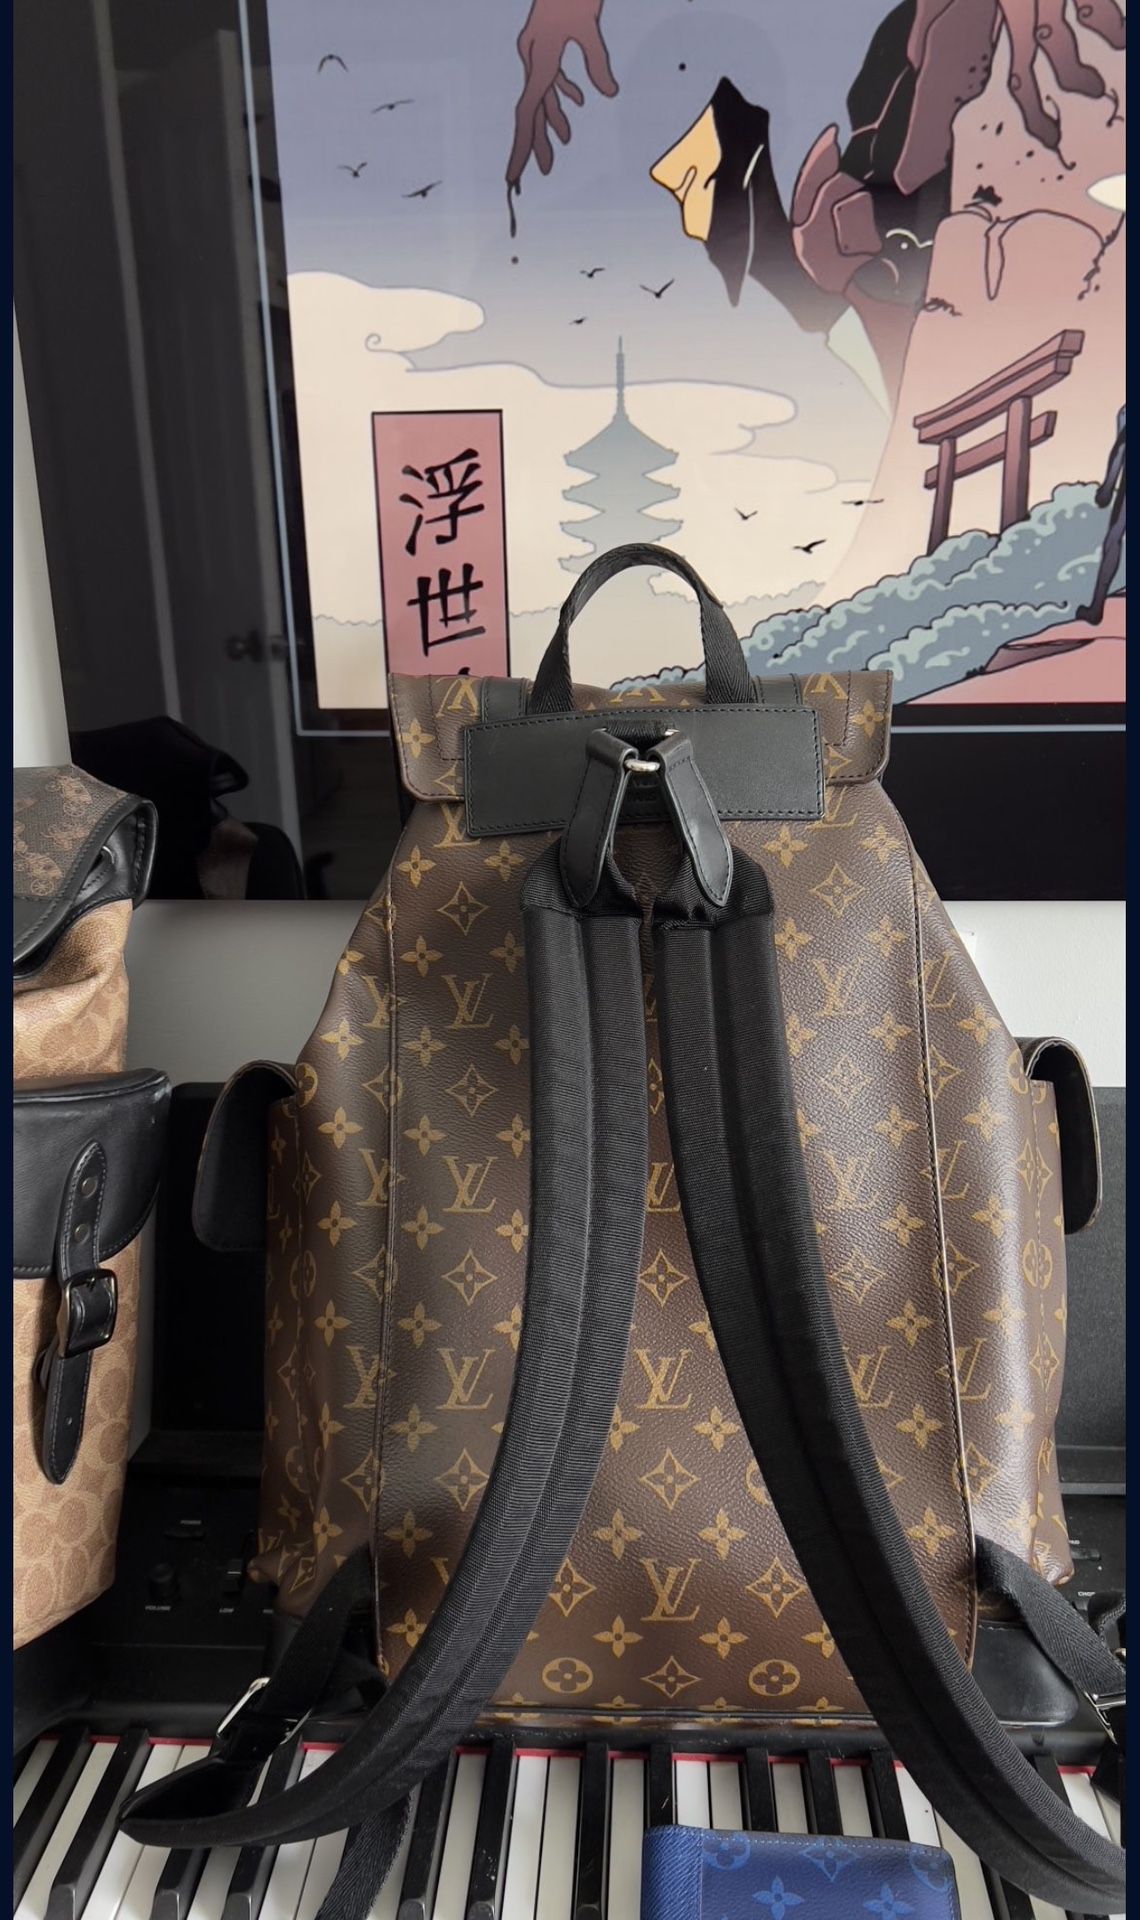 Men's Louis Vuitton backpack for Sale in Mount Royal, NJ - OfferUp